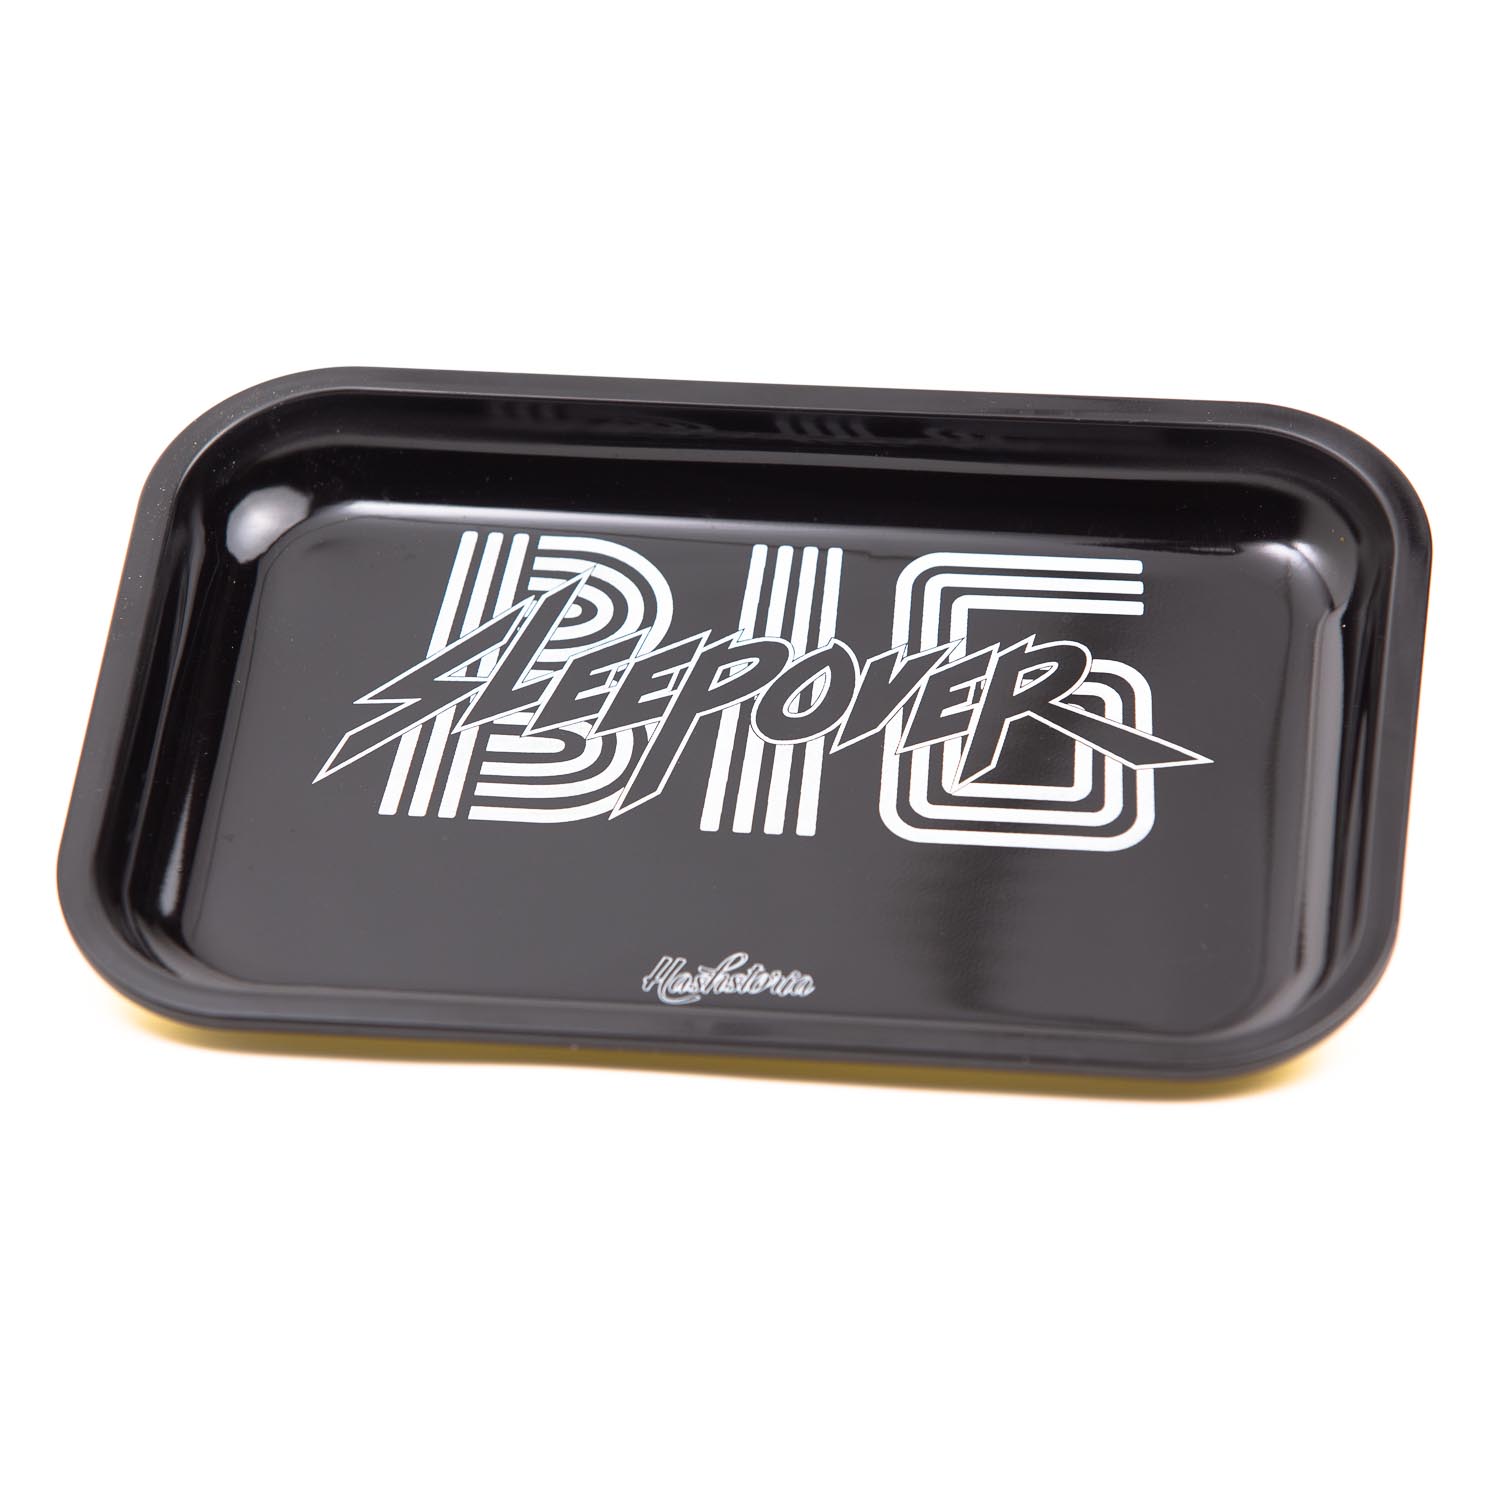 rolling trays